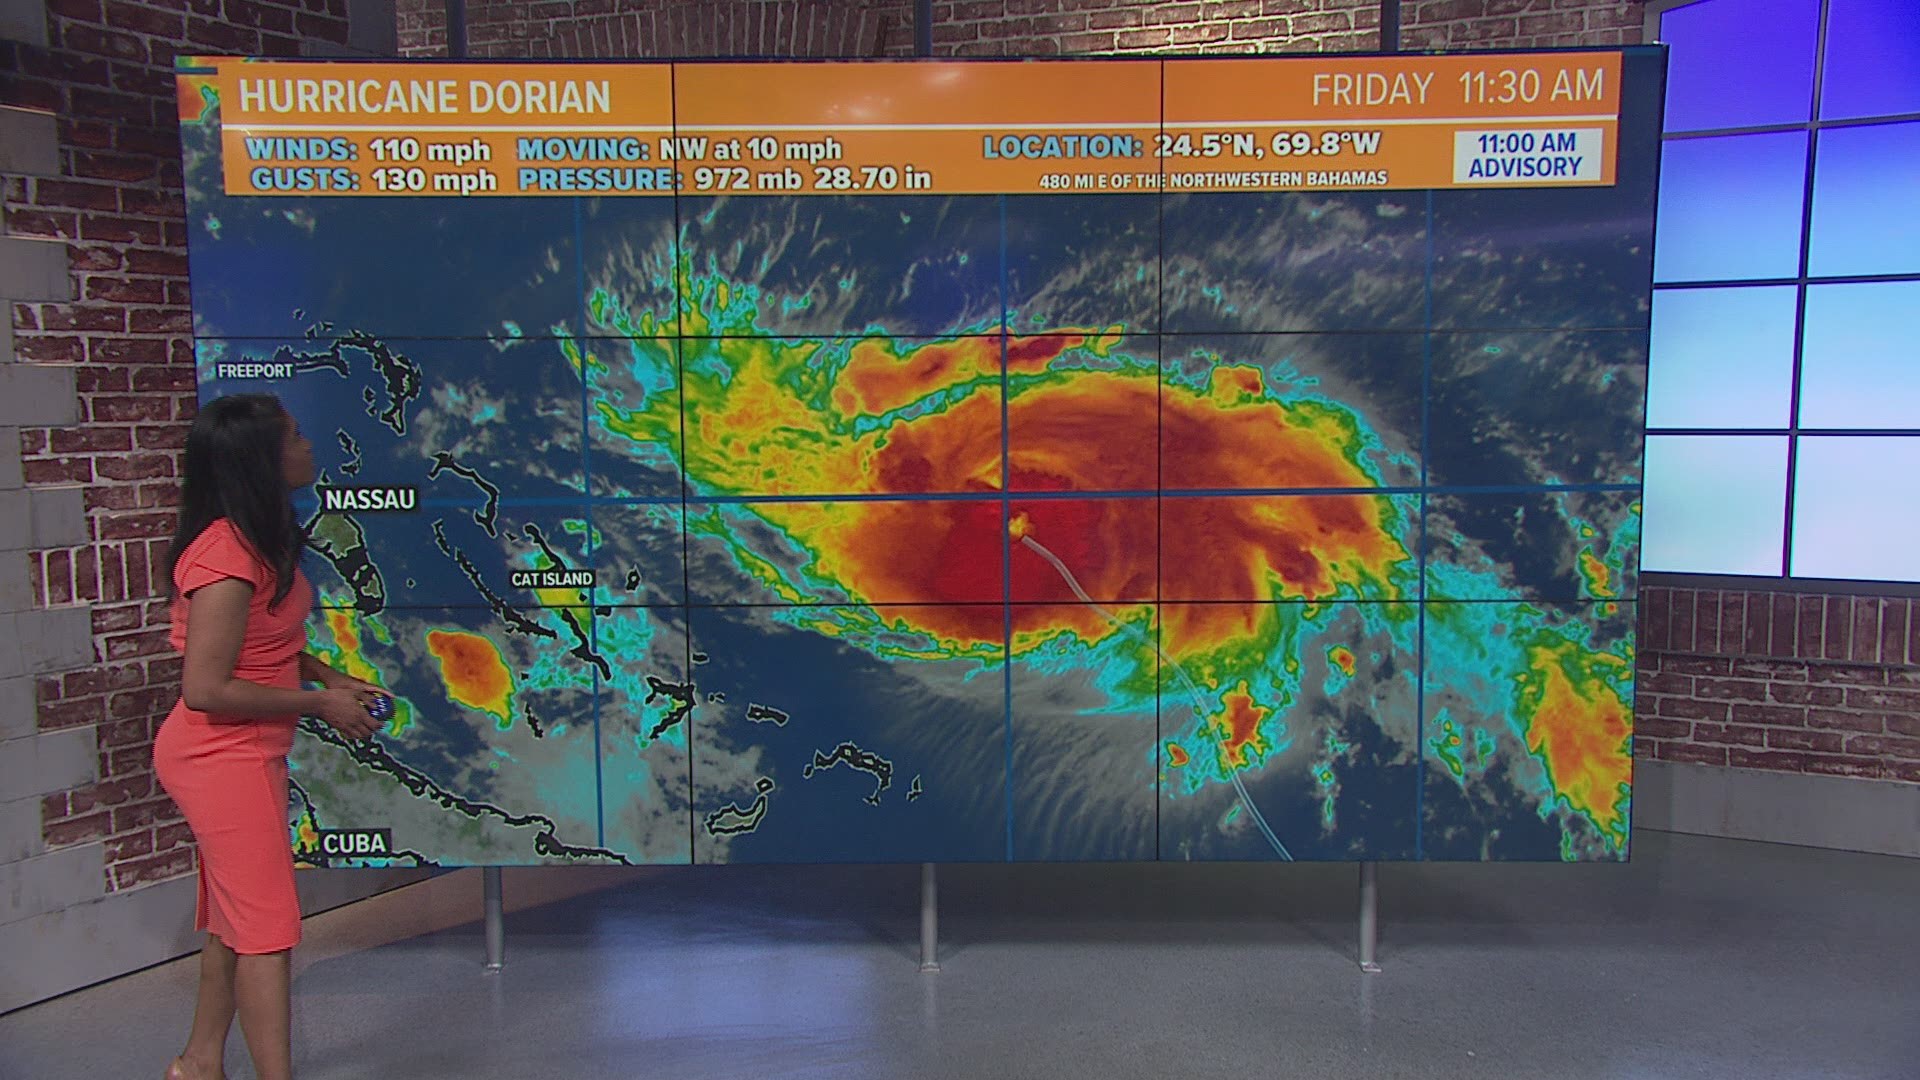 Dorian is expected to be a dangerous hurricane on its final approach to the U.S. mainland and could become Category 4 hurricane by Monday.